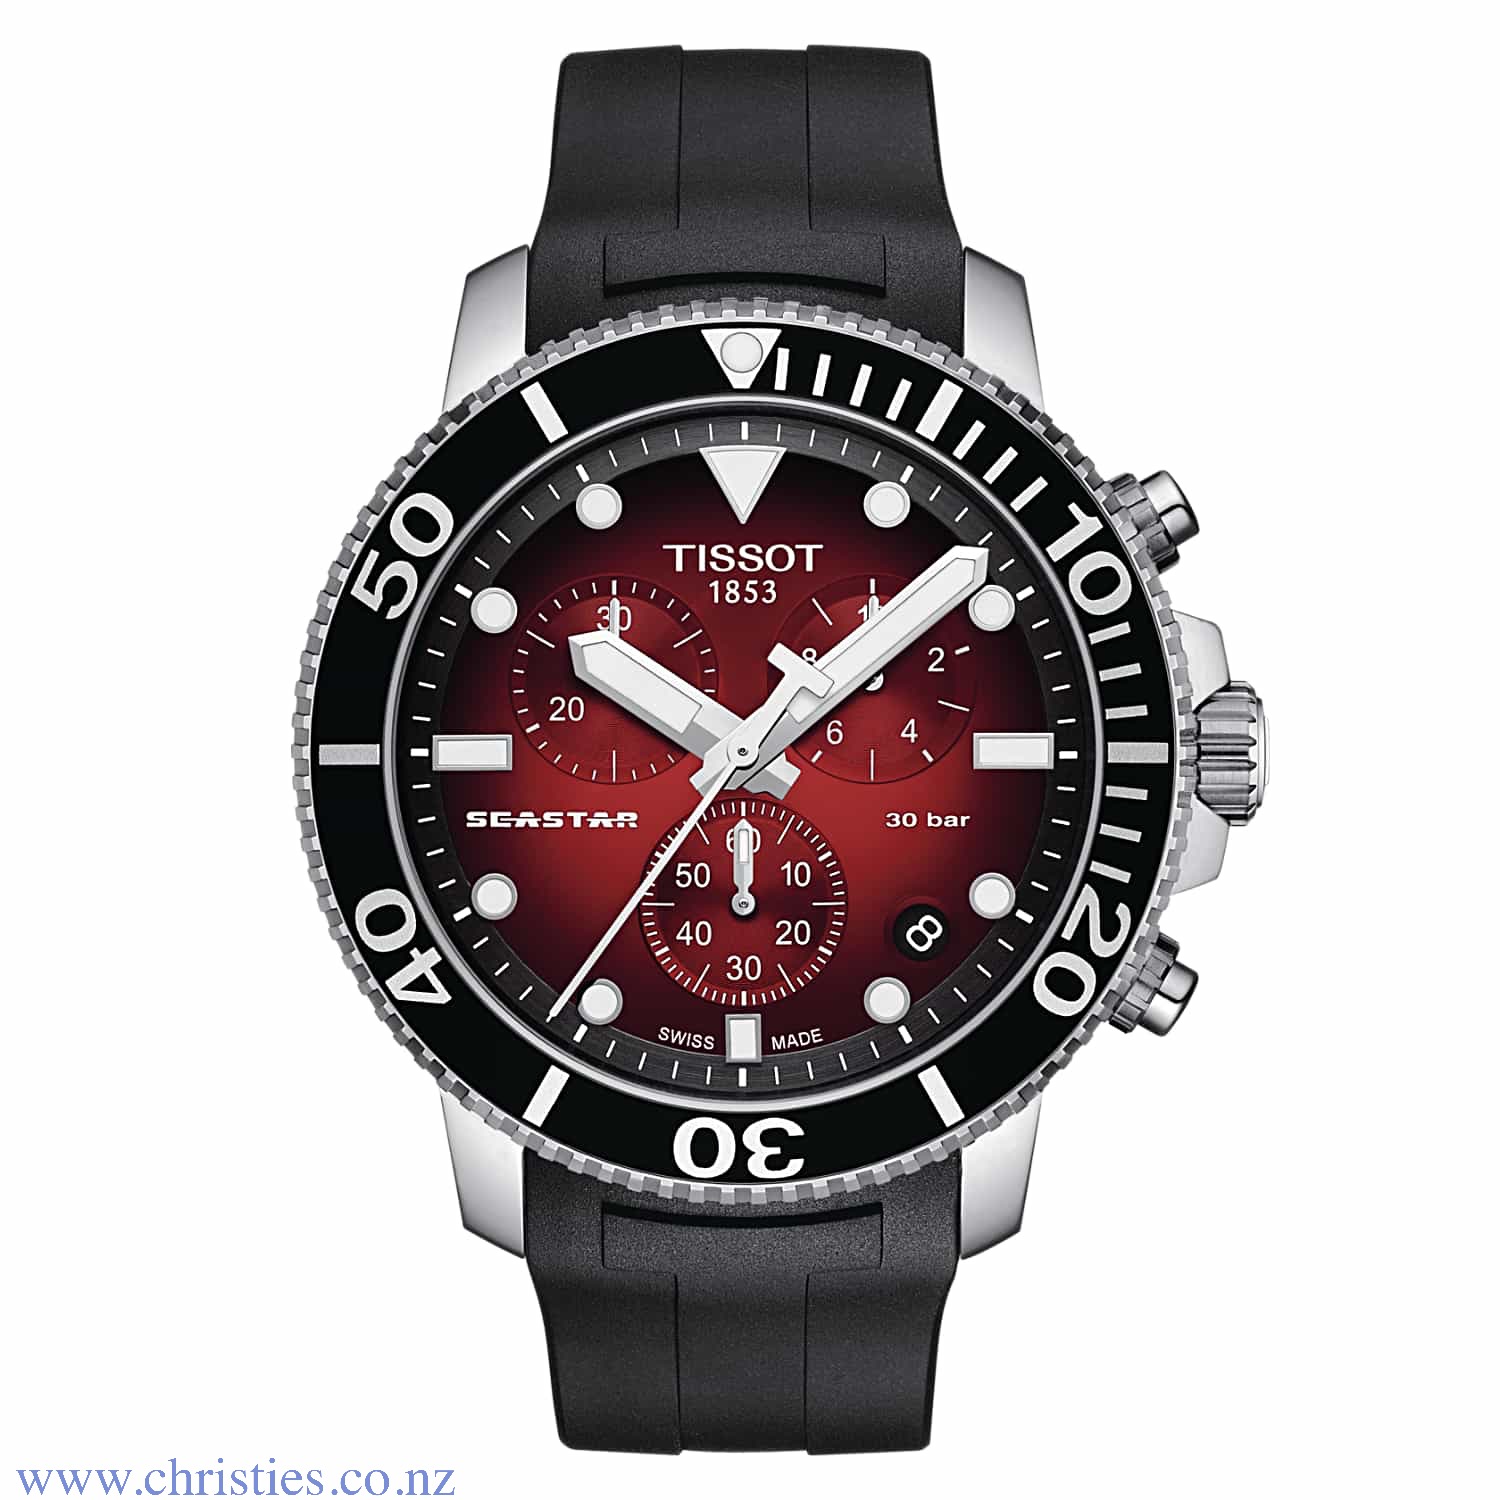 TISSOT Seastar 1000 Chronograph T120.417.17.421.00. The Tissot Seastar 1000 Chronograph is the instinctive choice for water sports lovers. Its impressive water-resistance up to a pressure of 30 bar (300 m/1000 ft) is combined with the energy of a Swiss-ma